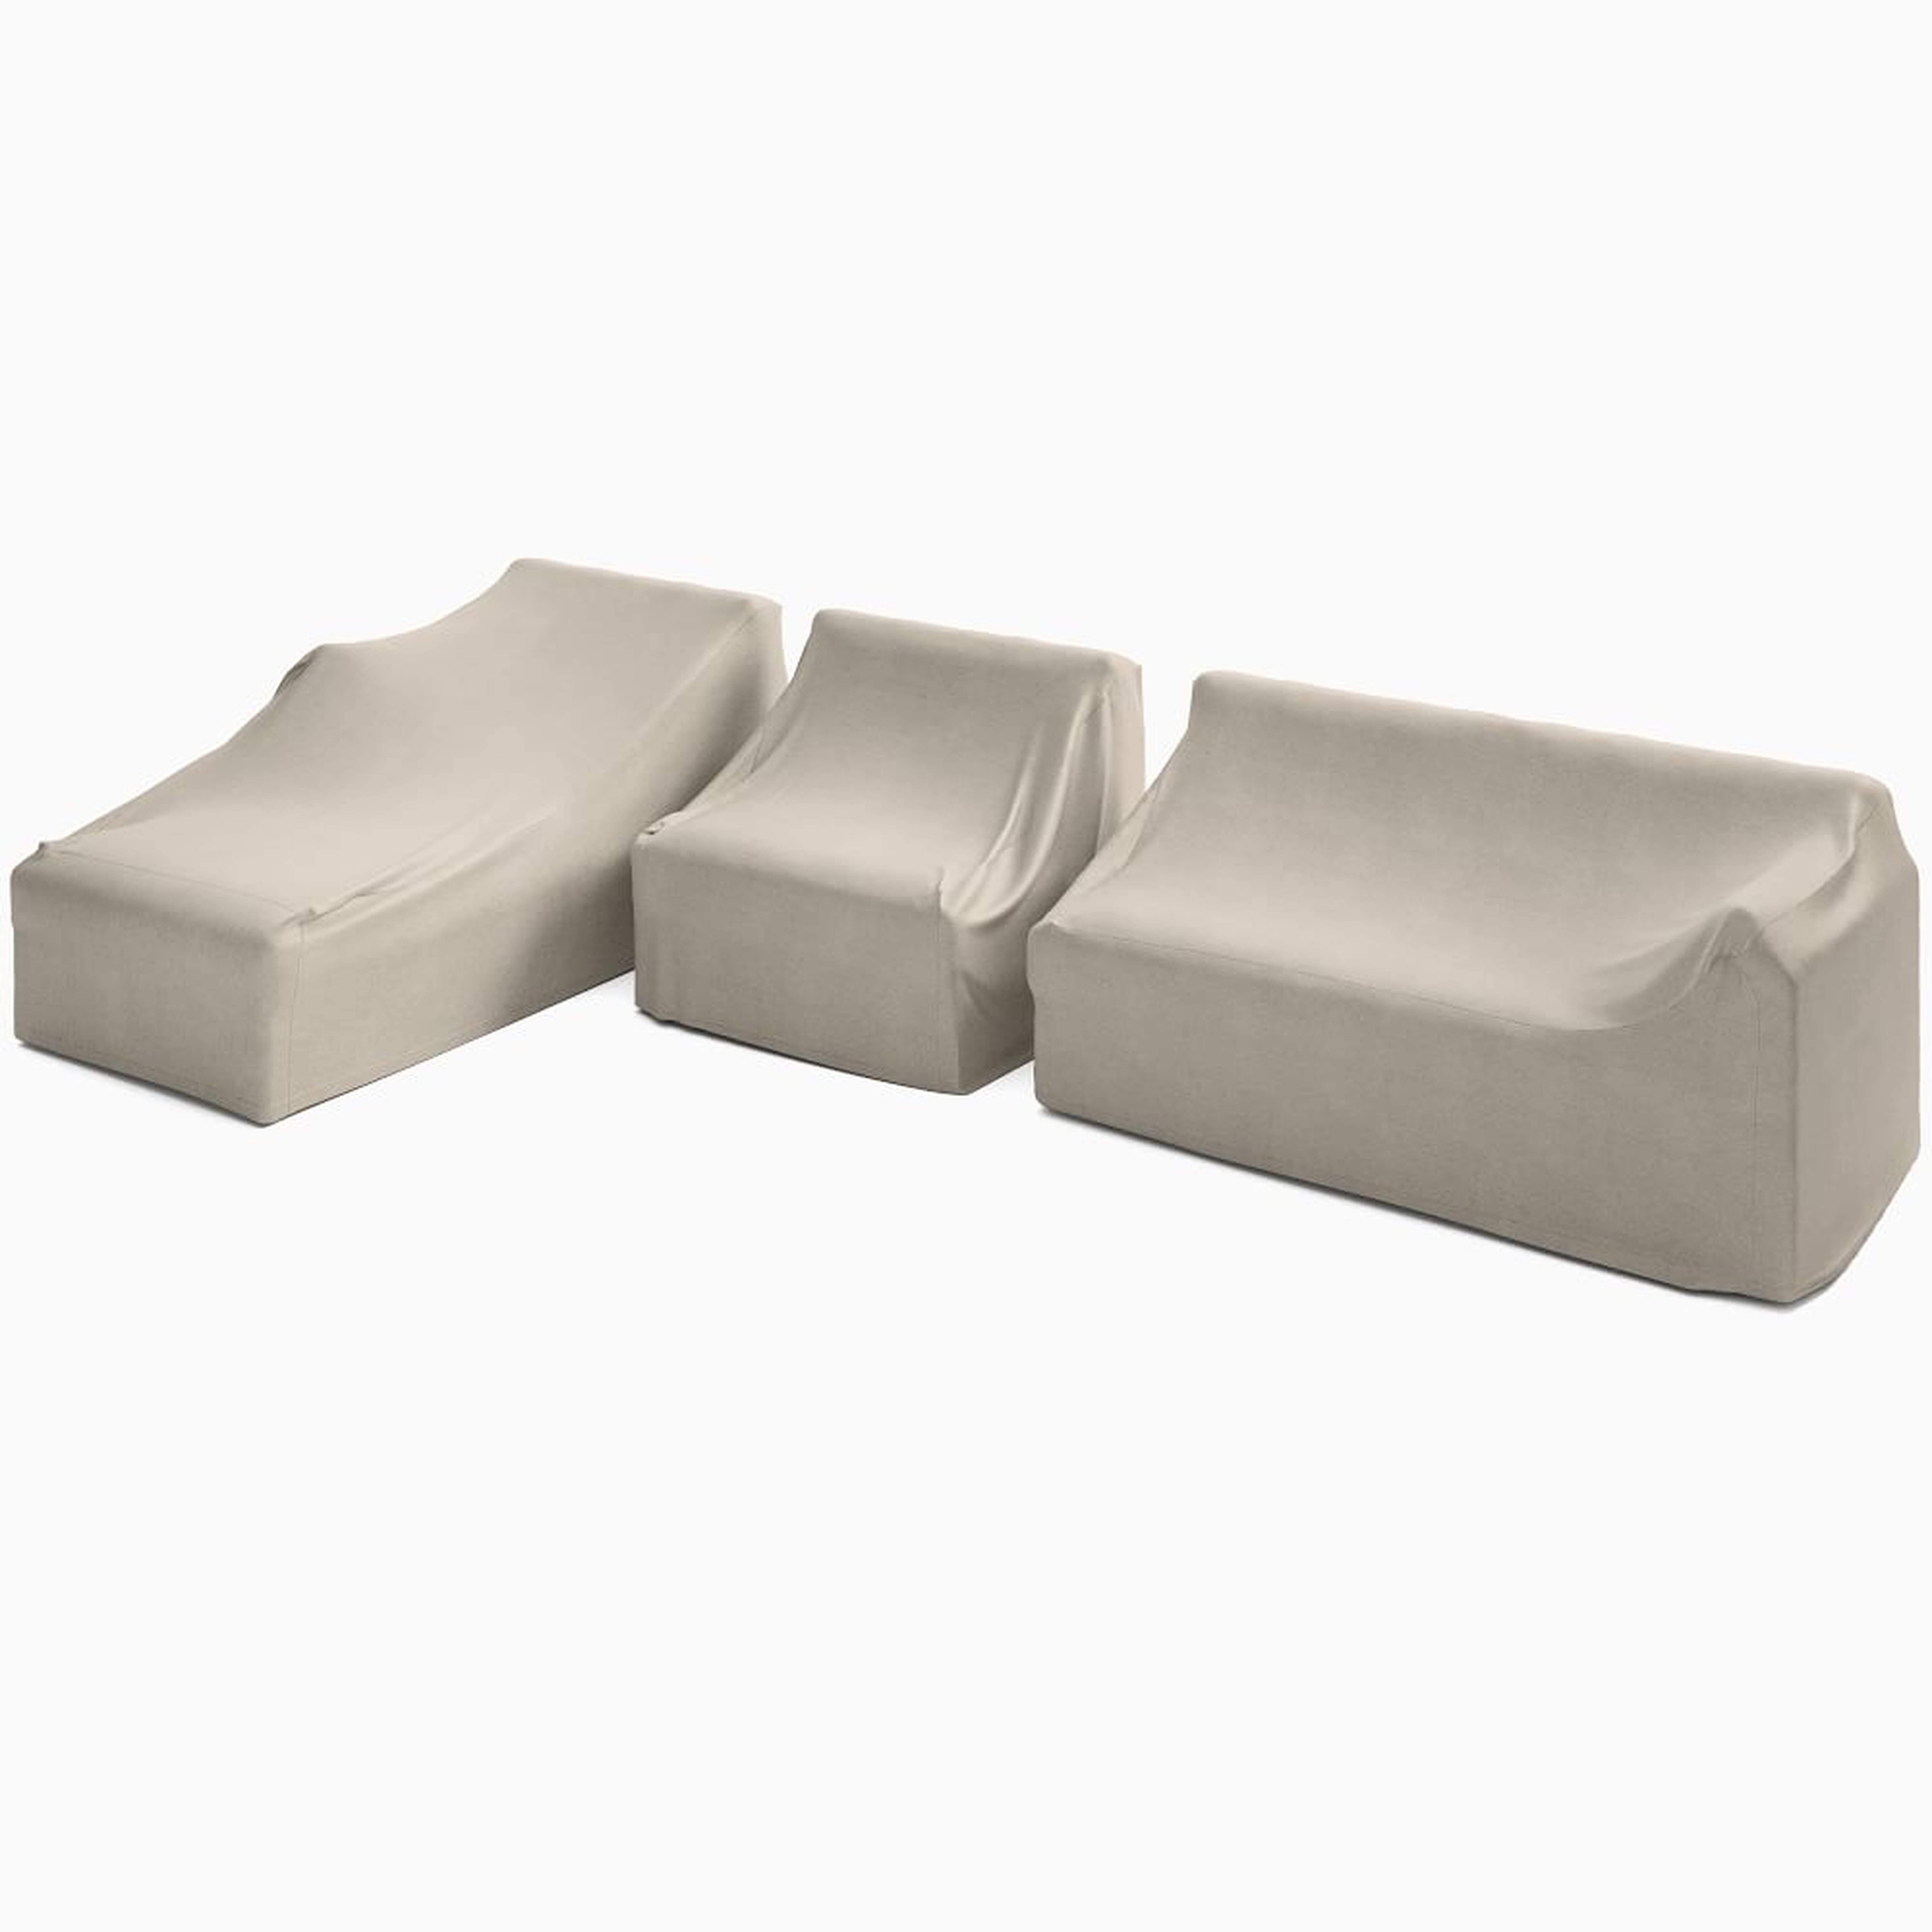 Santa Fe Slatted 3 Piece Sectional Set 5: Left Arm Chaise + Armless Single + Right Arm Sofa Protective Cover - West Elm